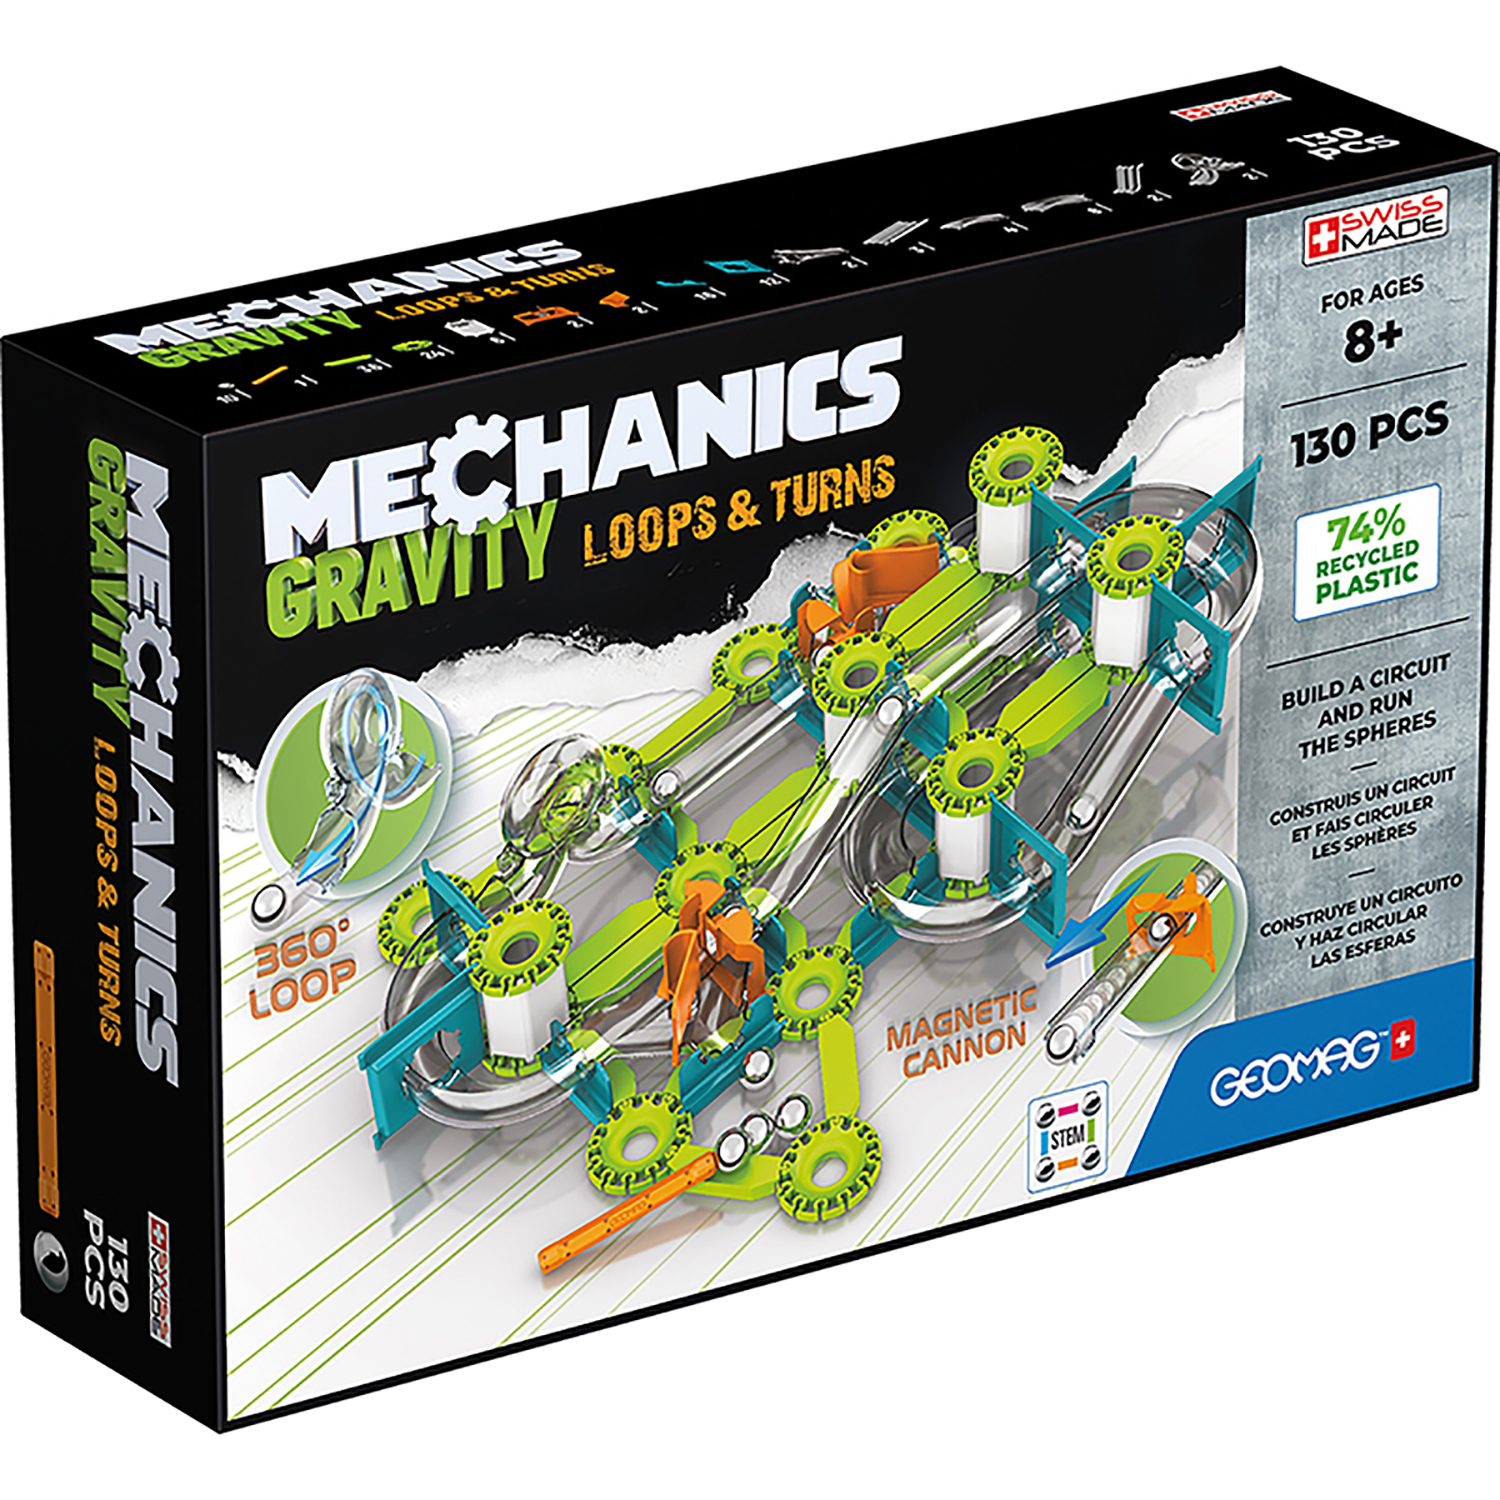 Geomag Mechanics Gravity Loops & Turns Recycled, 130 Pieces image number null